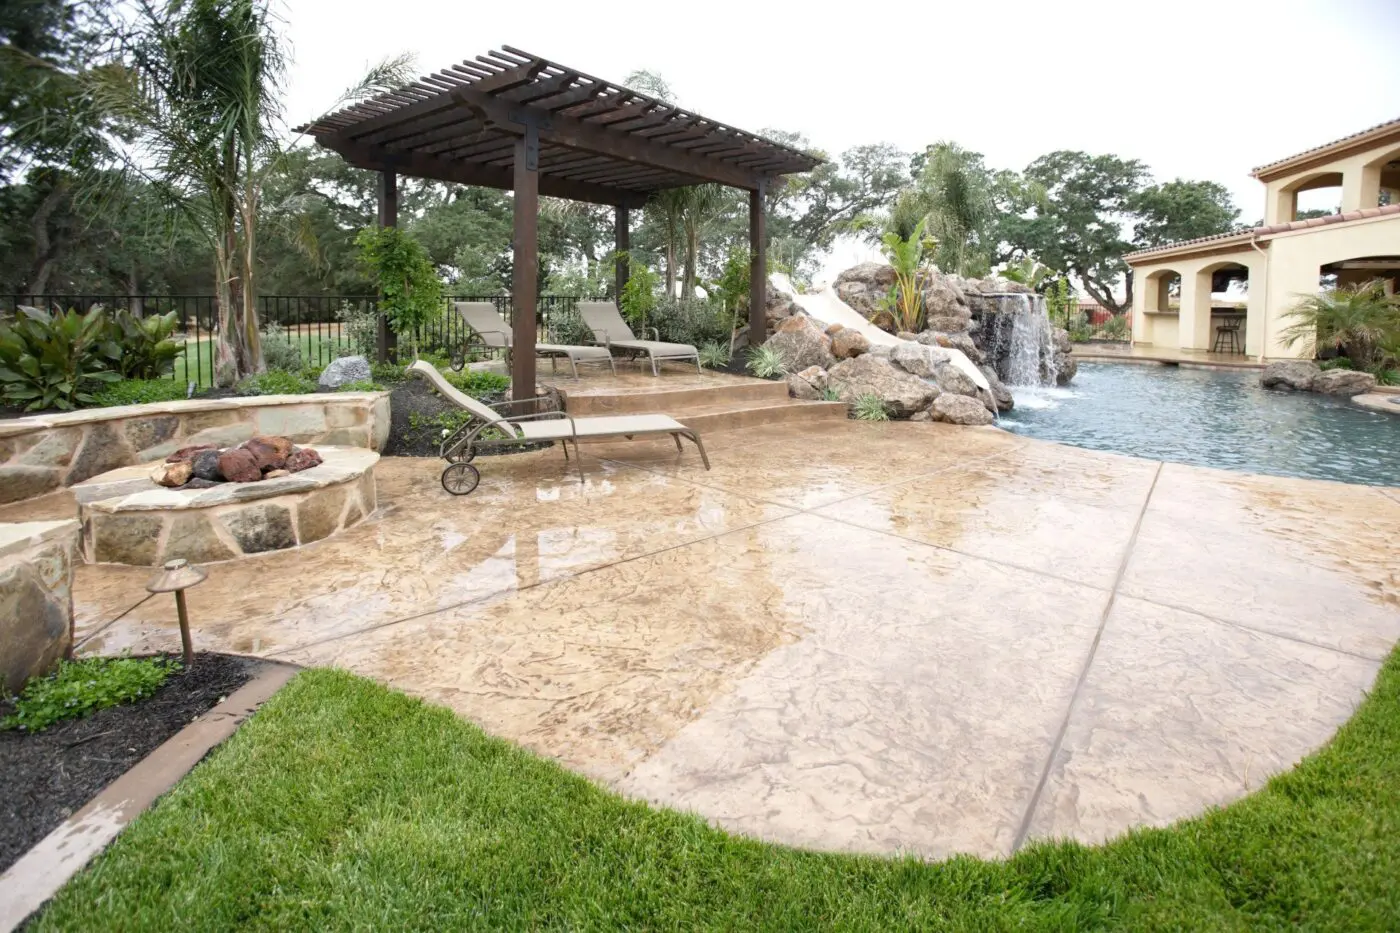 A luxurious backyard features a stamped concrete patio by Lauderdale Concrete with a poolside pergola, several lounge chairs, and lush landscaping. A stone fire pit is positioned on the left, and a rock waterfall cascades into the pool. The area is surrounded by greenery and trees. Contact Lauderdale Concrete for a free quote today!